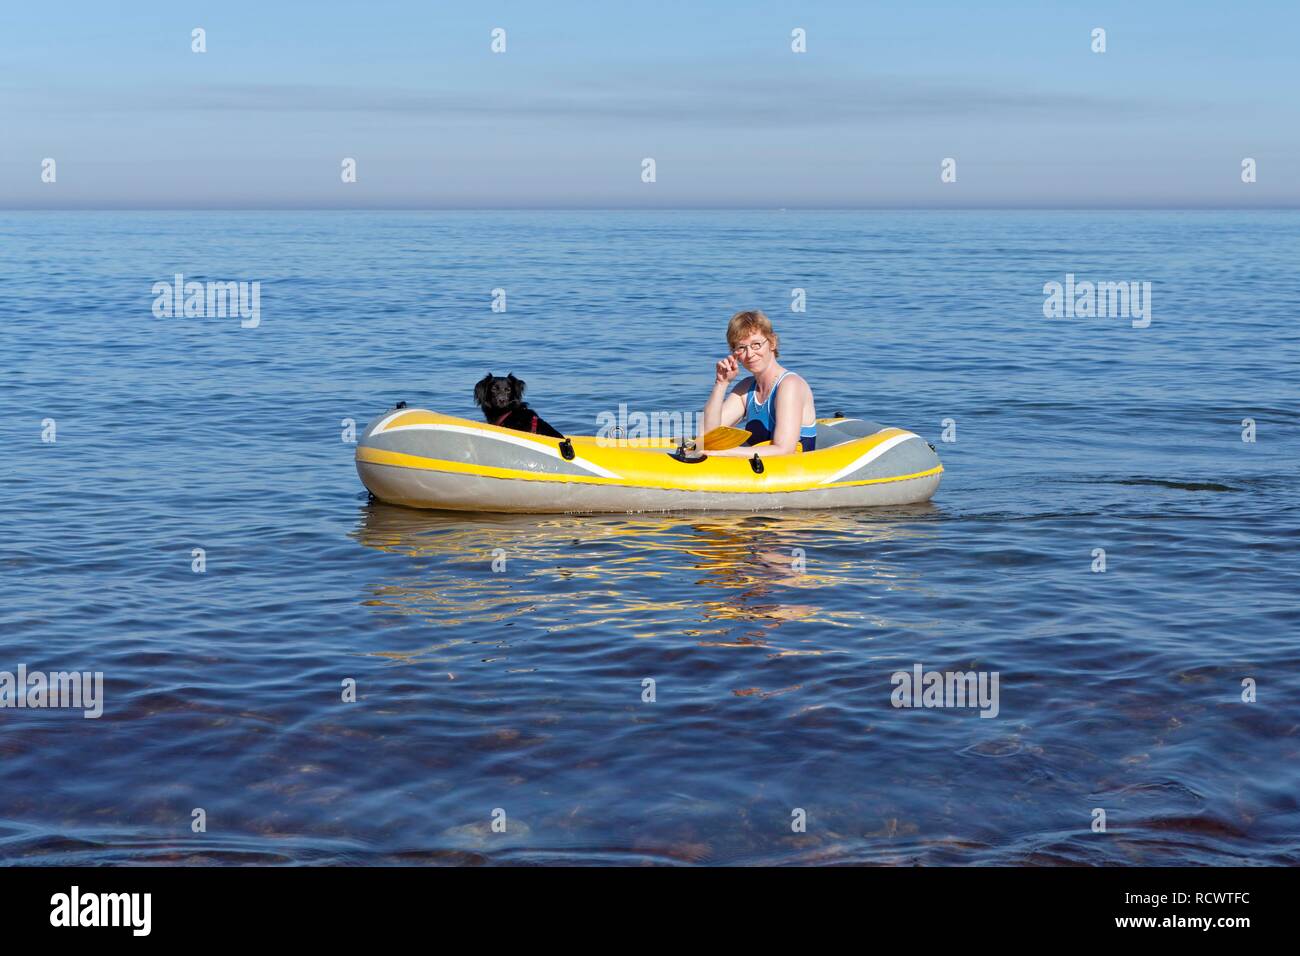 Woman with dog in a rubber boat, Kuehlungsborn-West, Mecklenburg-Western Pomerania Stock Photo